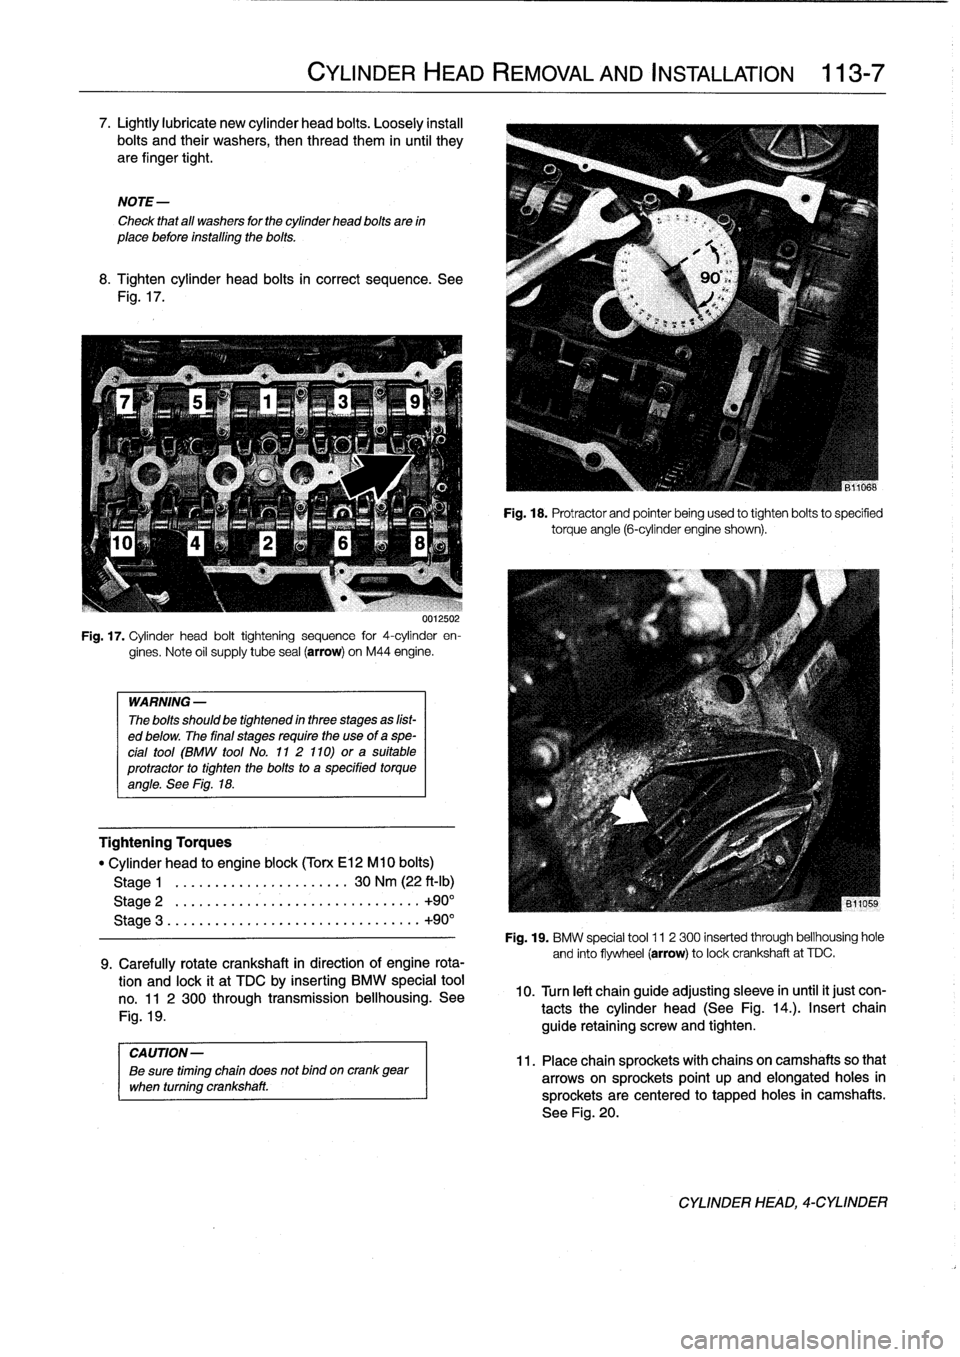 BMW 328i 1994 E36 Workshop Manual 
7
.
Lightly
lubricate
new
cylinder
head
bolts
.
Loosely
instan
bolts
and
their
washers,
then
thread
them
in
until
they
are
finger
tight
.

NOTE-

Check
that
all
washers
for
the
cylinder
head
bolts
ar